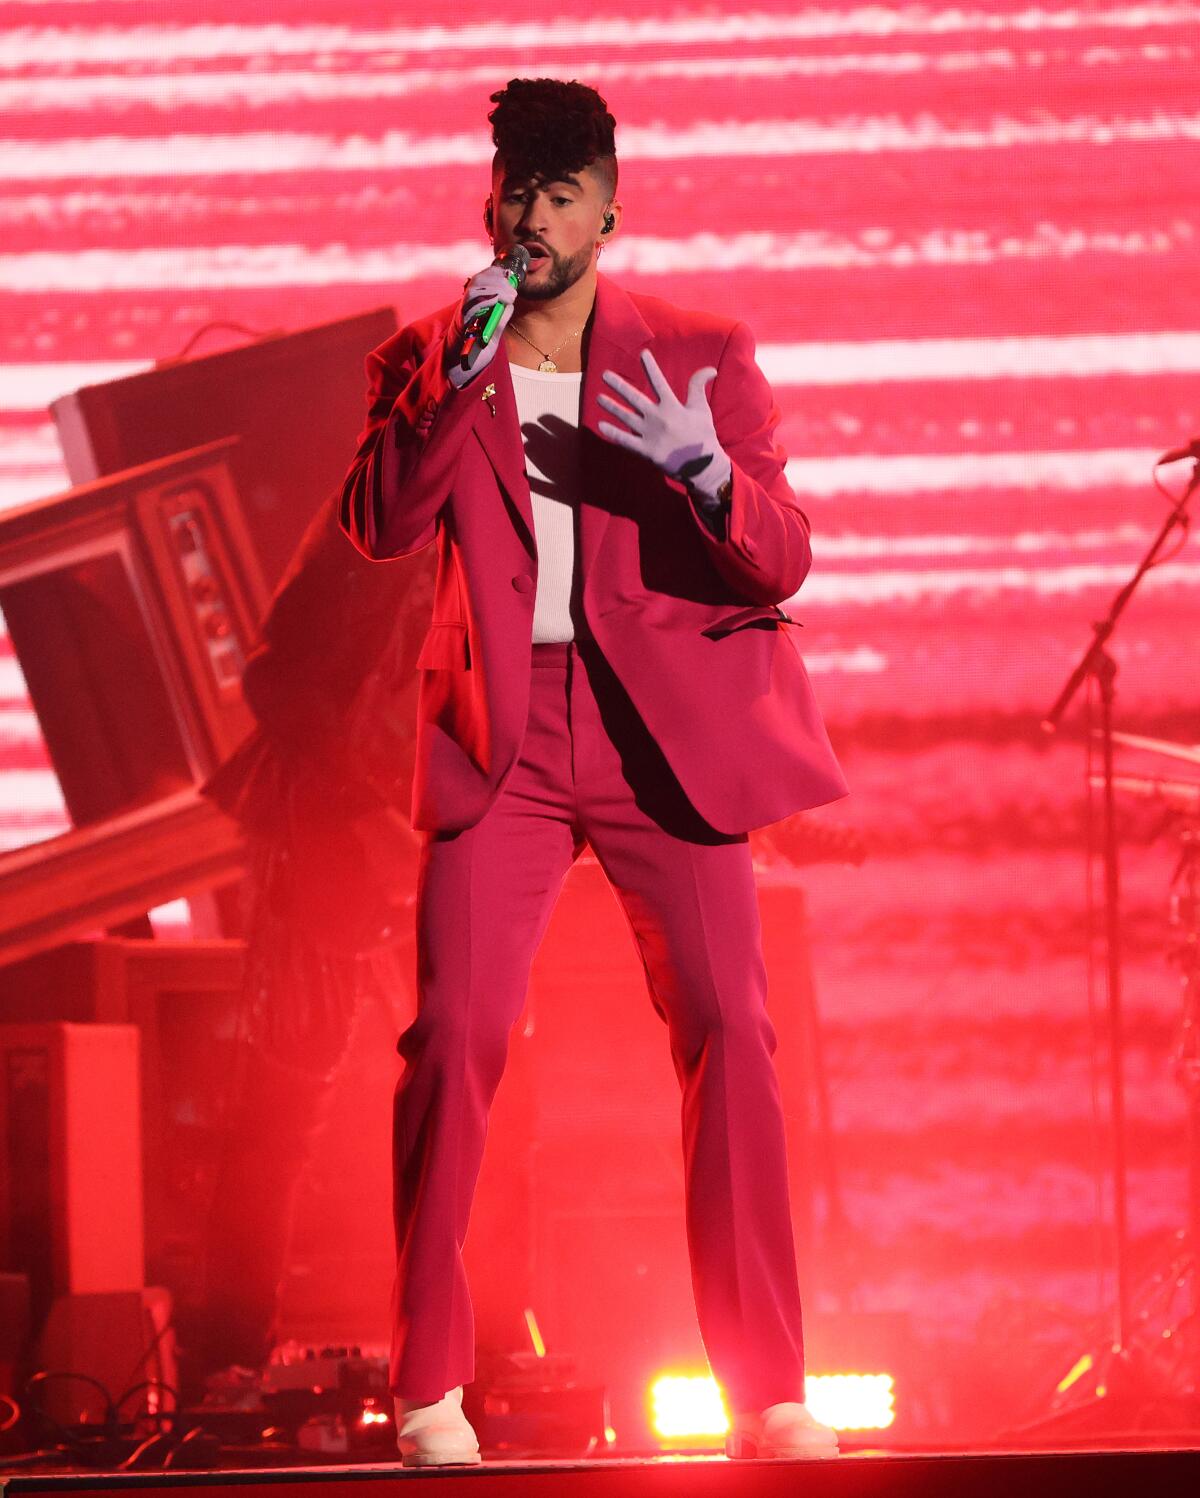 A man in a red suit performs onstage